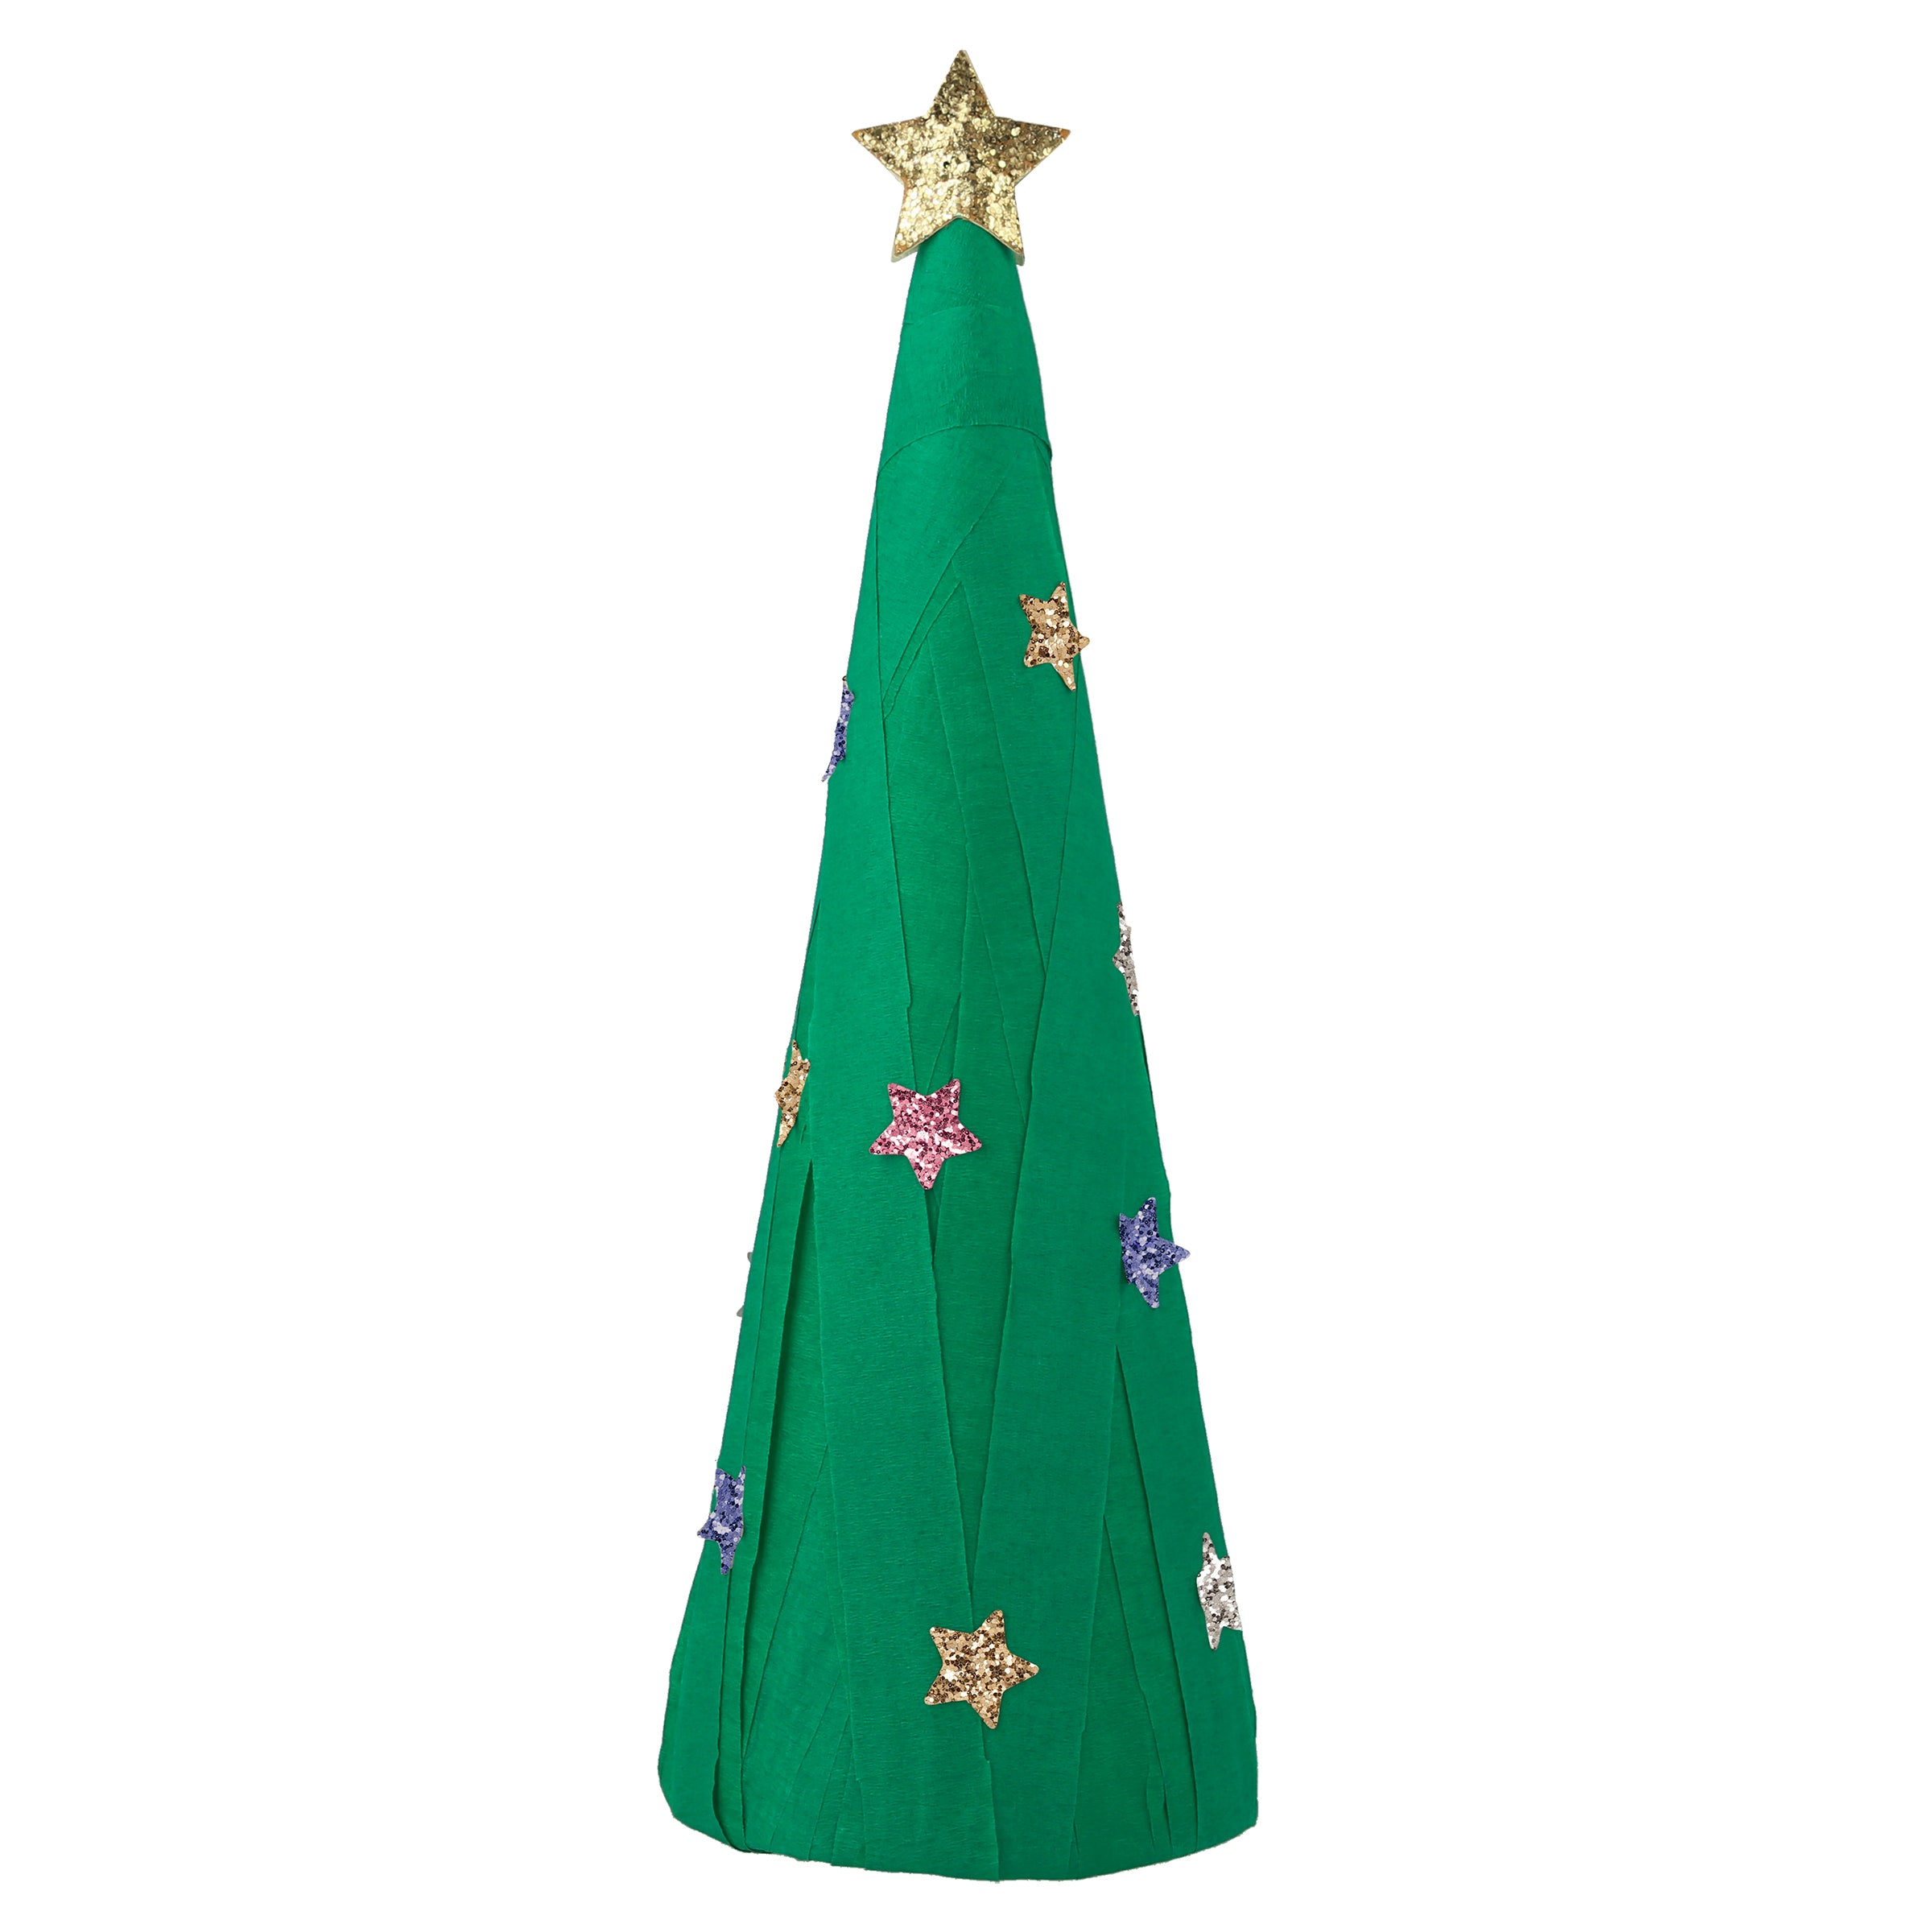 This surprise ball, in the shape of a Christmas tree, contains a necklace, gold party hat, temporary tattoos for kids and stickers for kids.